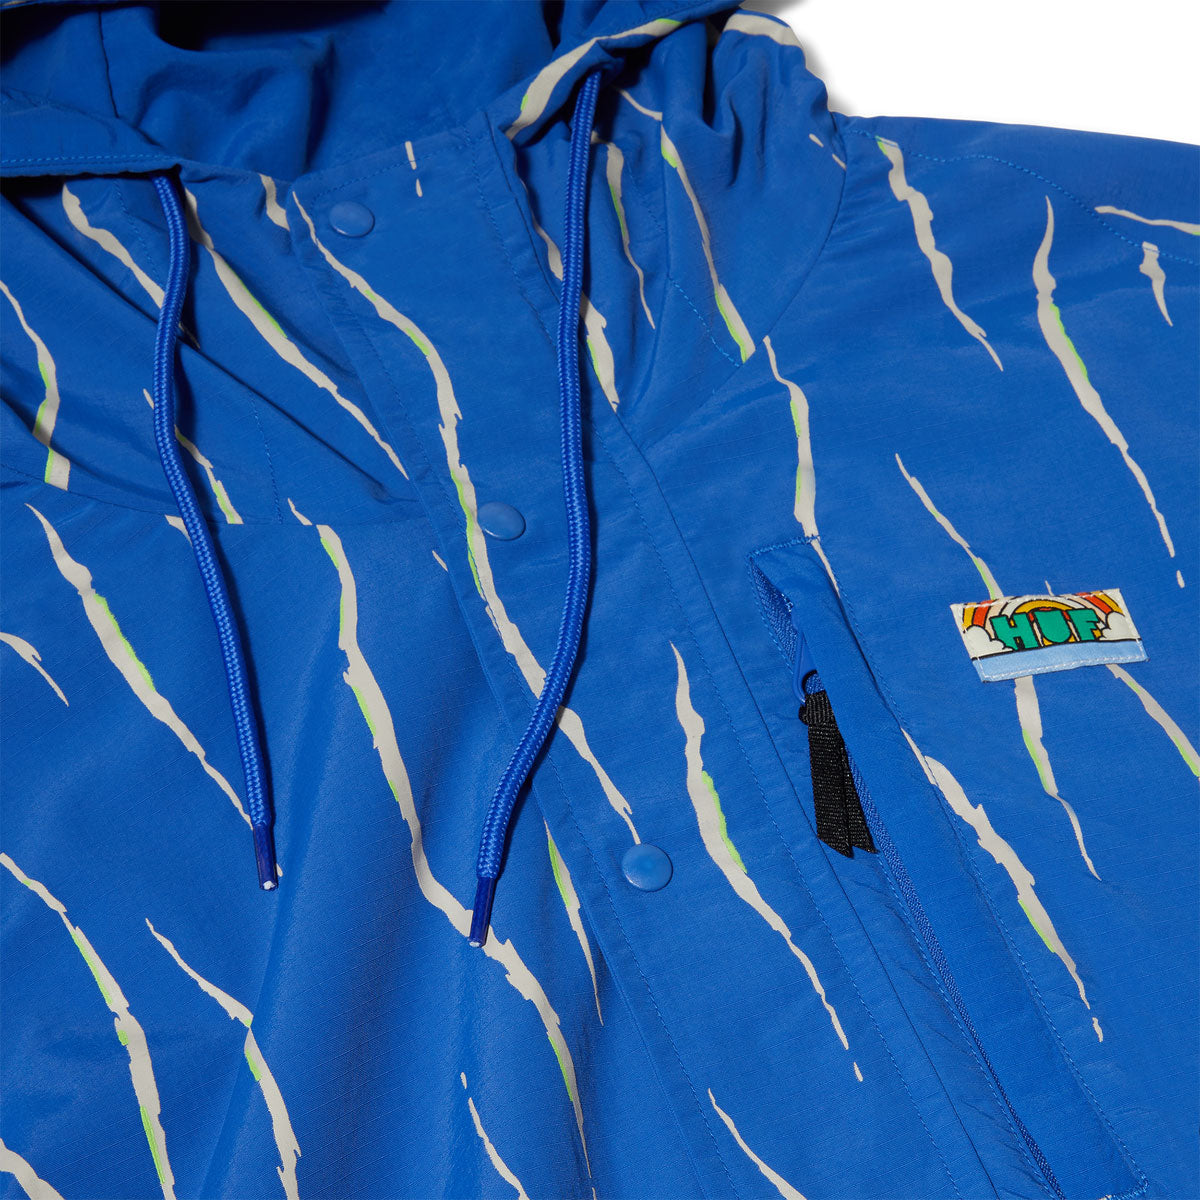 HUF New Day Striped Packable Anorak Jacket - Blue image 4